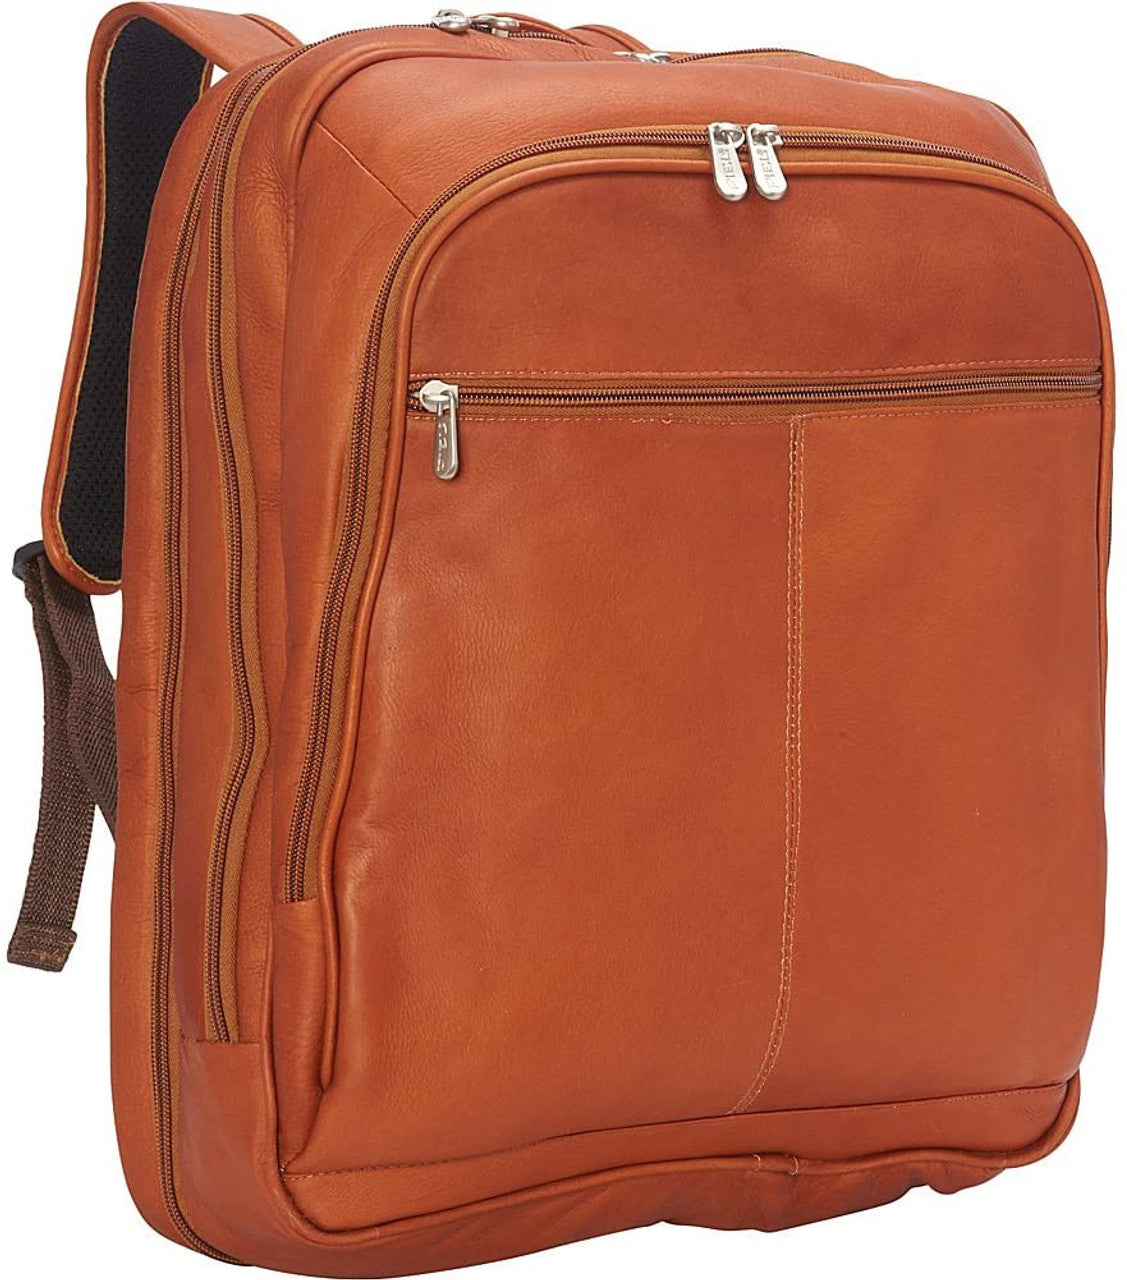 XL Laptop Travel Backpack - Leather Loom